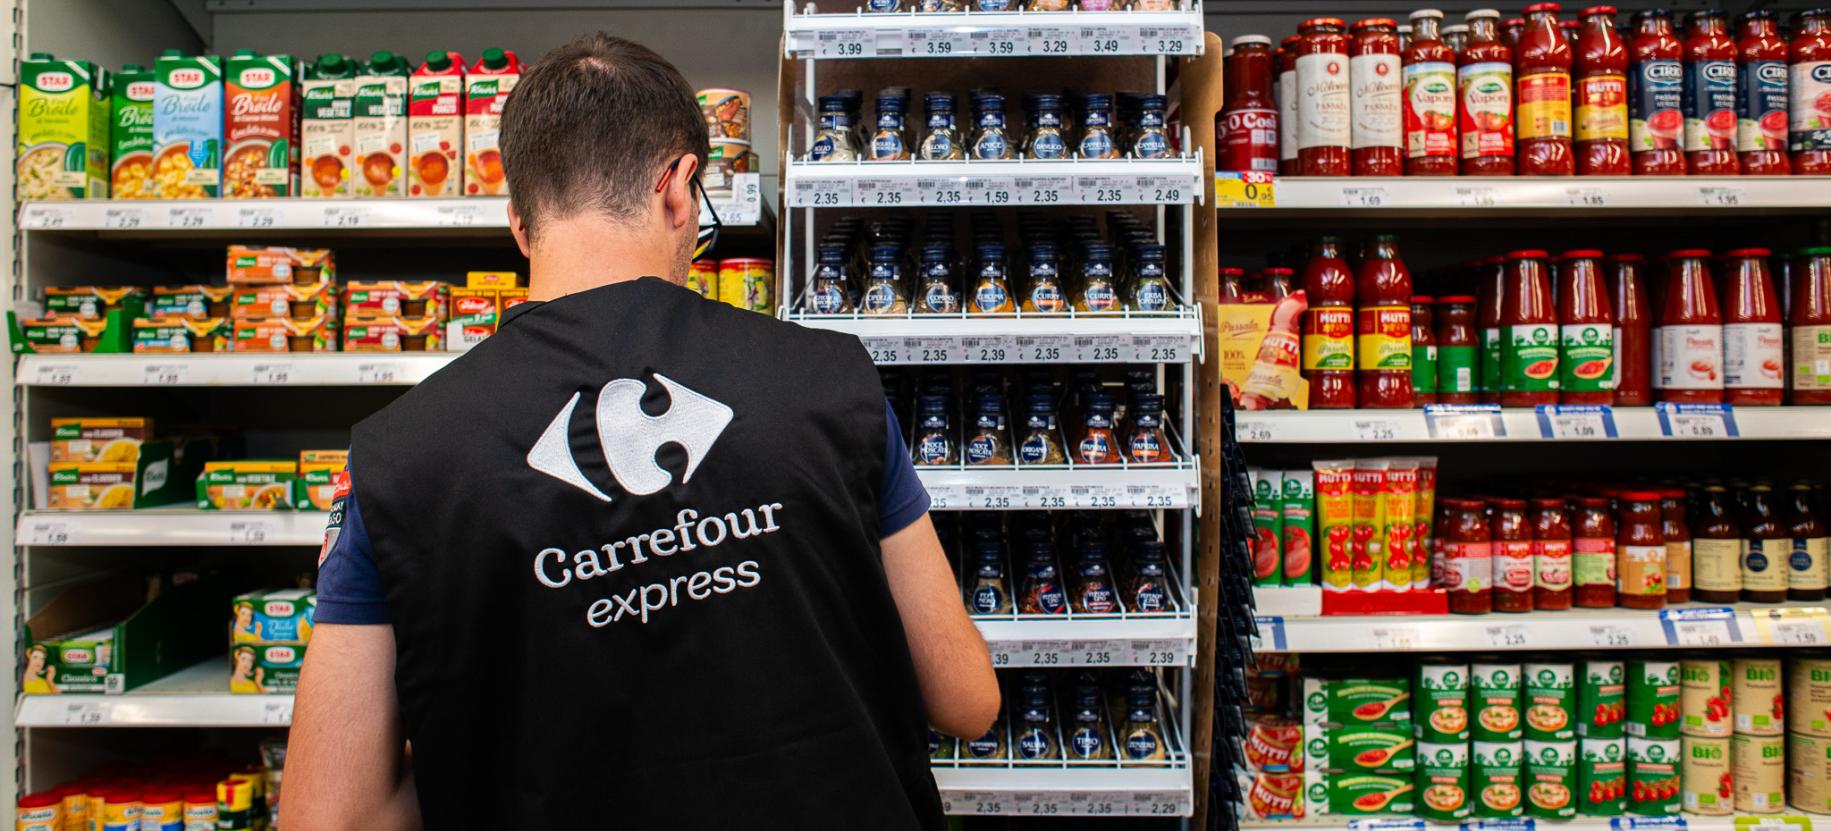 Carrefour Express Brusson